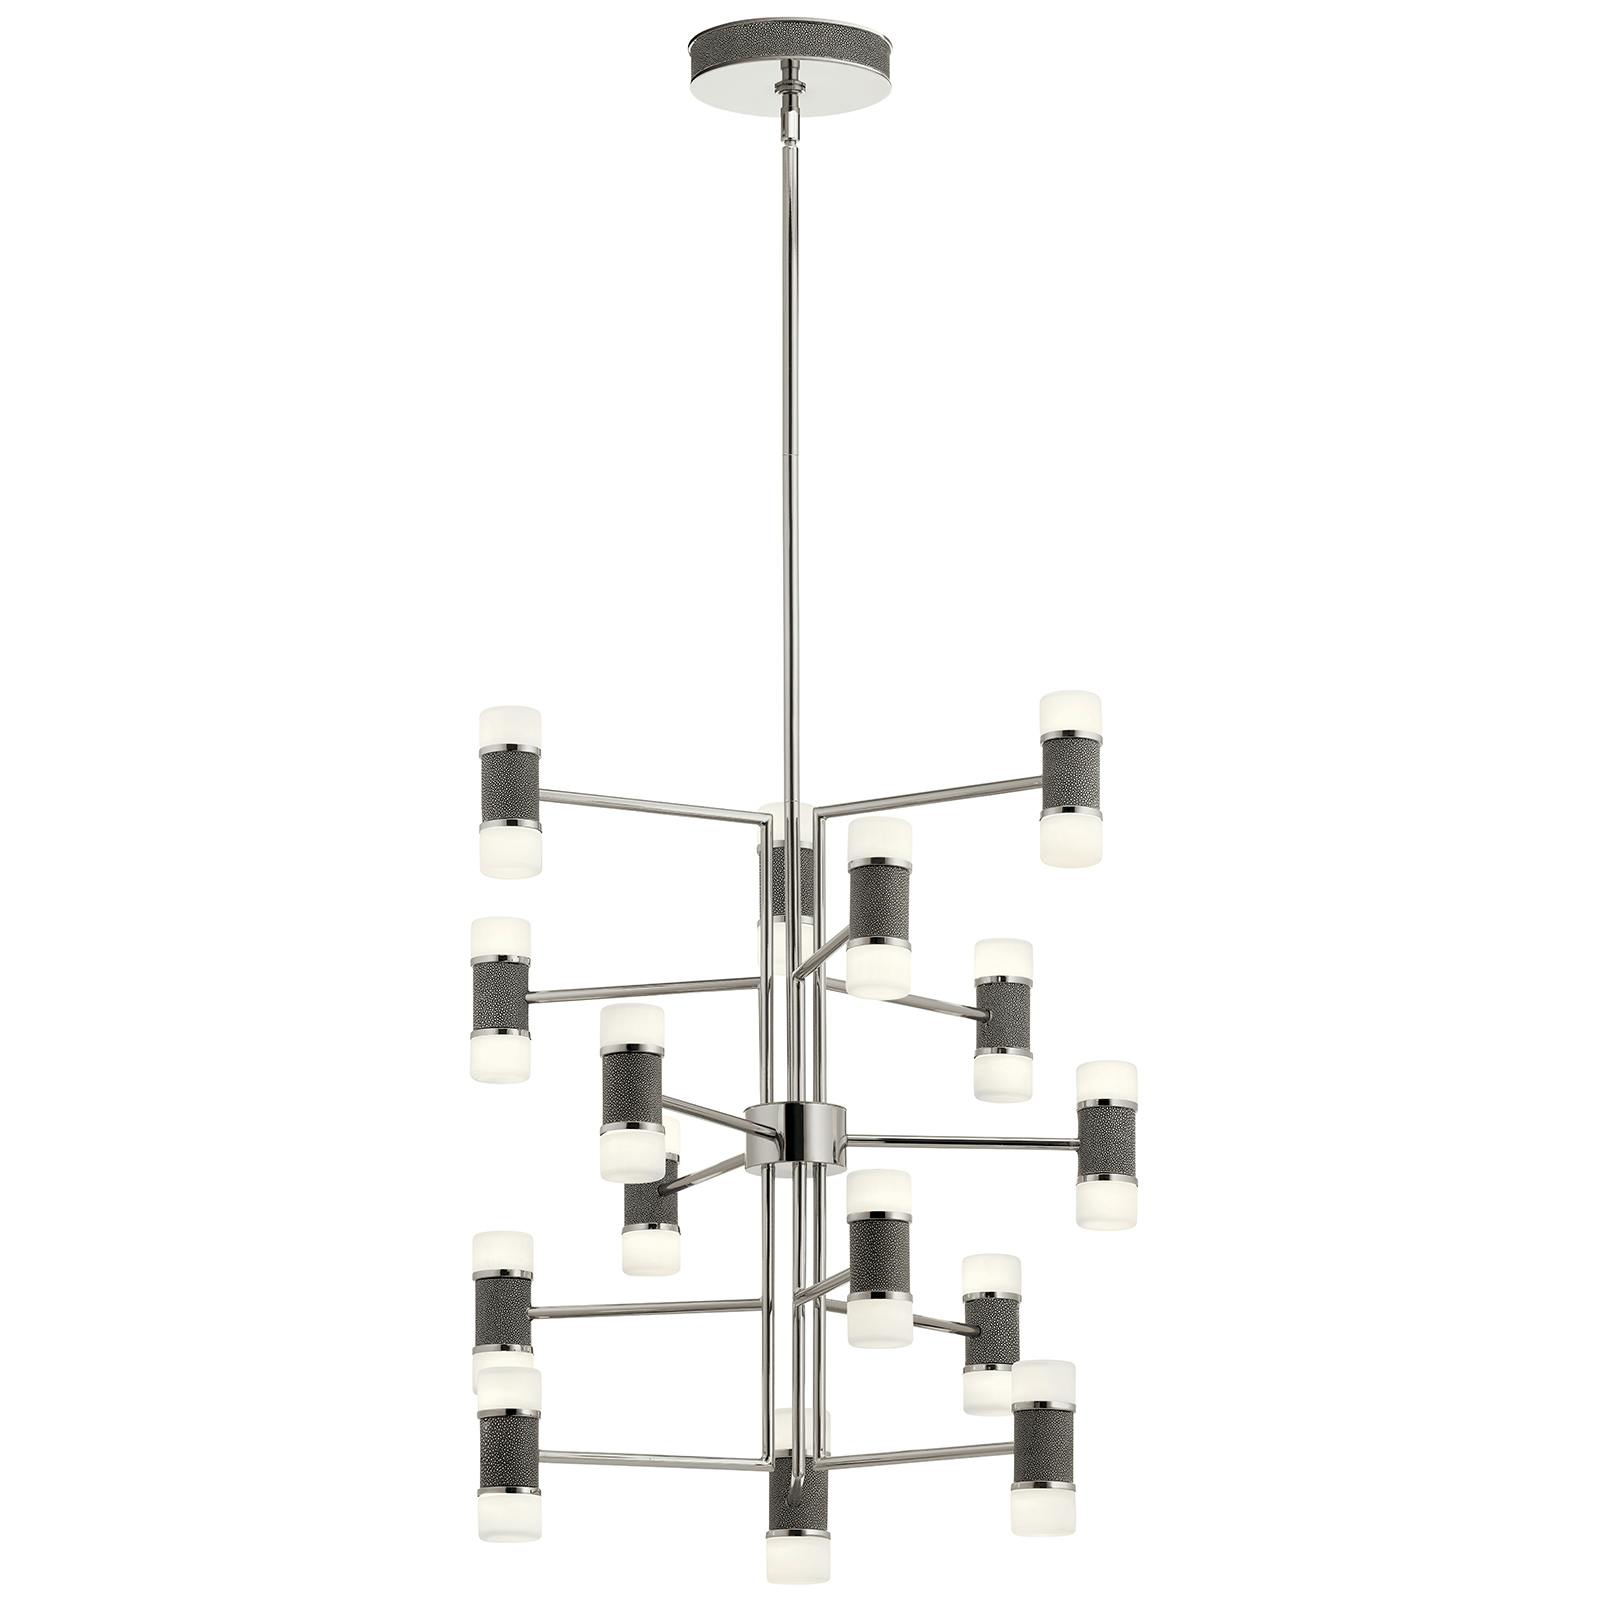 Profile view of the Vey 5 Tier Foyer Chandelier Nickel on a white background